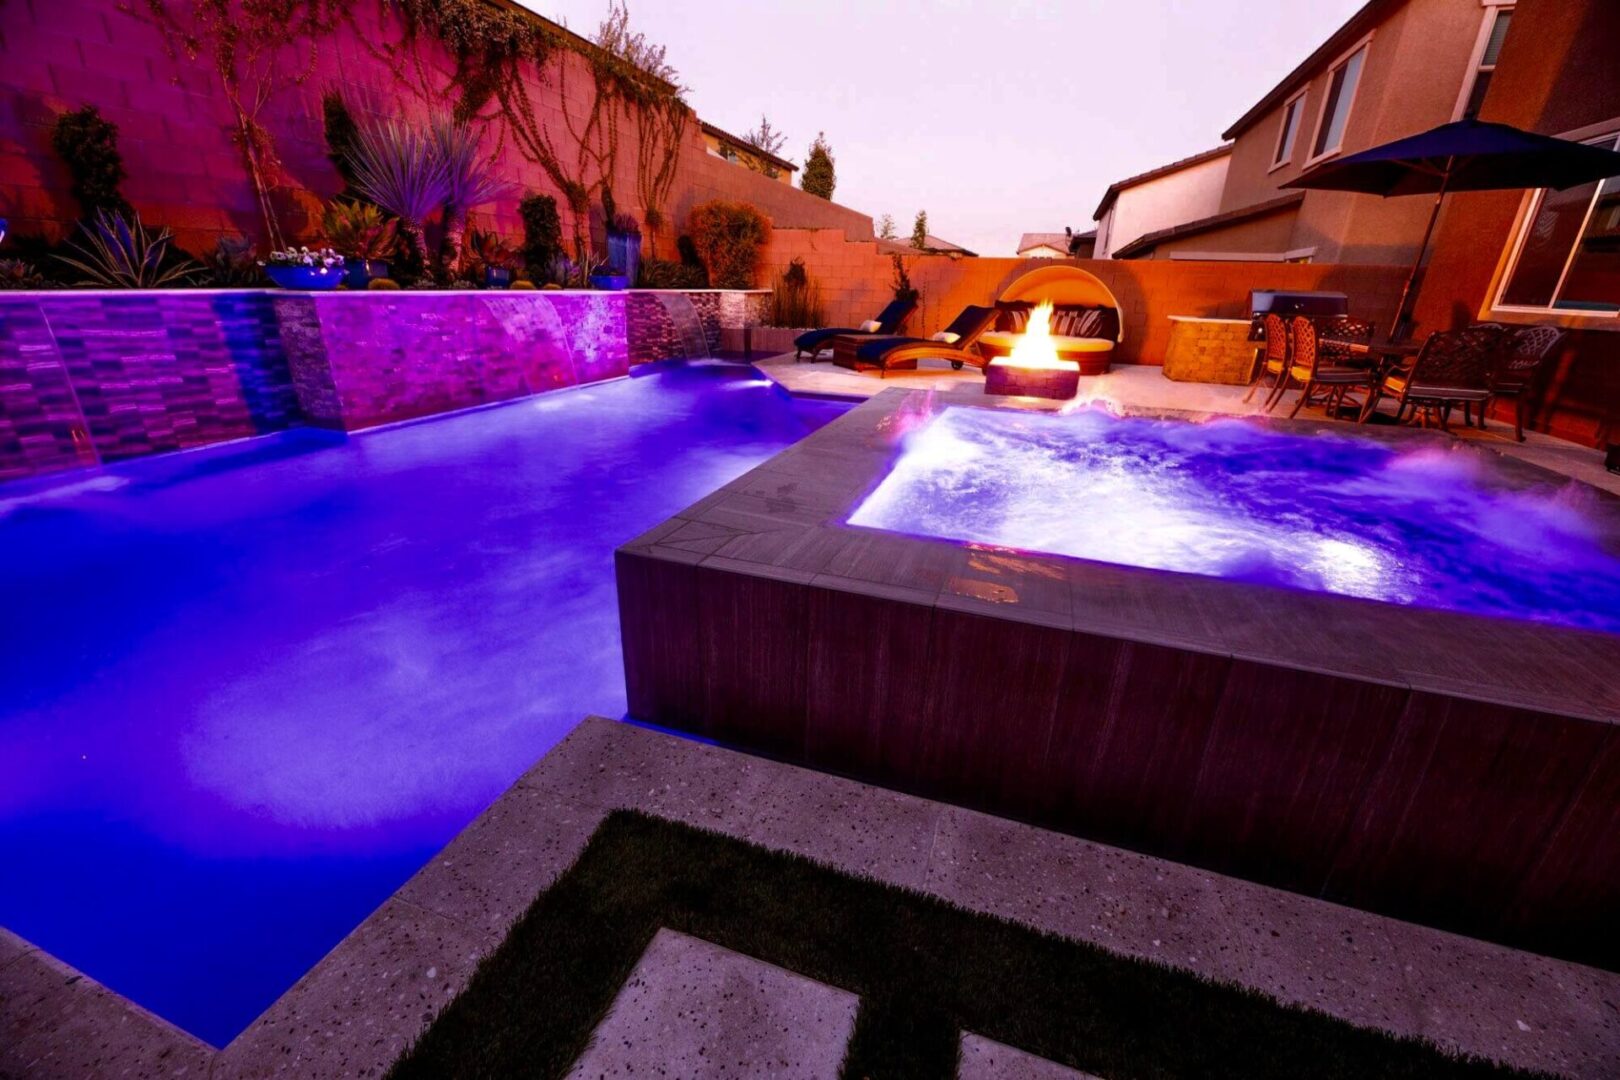 A pool with a fire pit and jacuzzi in it